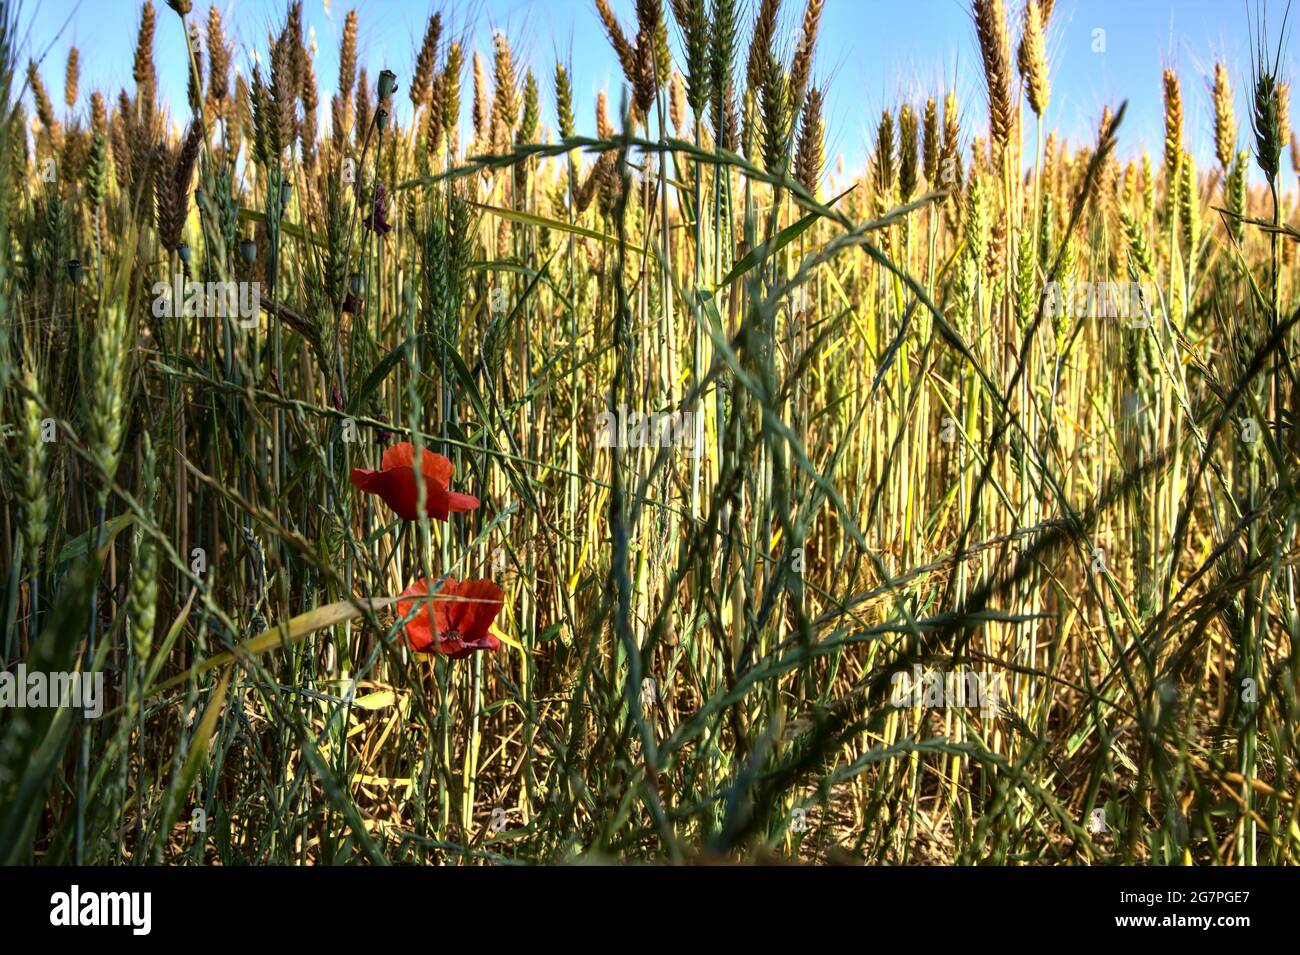 Poppies growing among ears of wheat seen up close Stock Photo